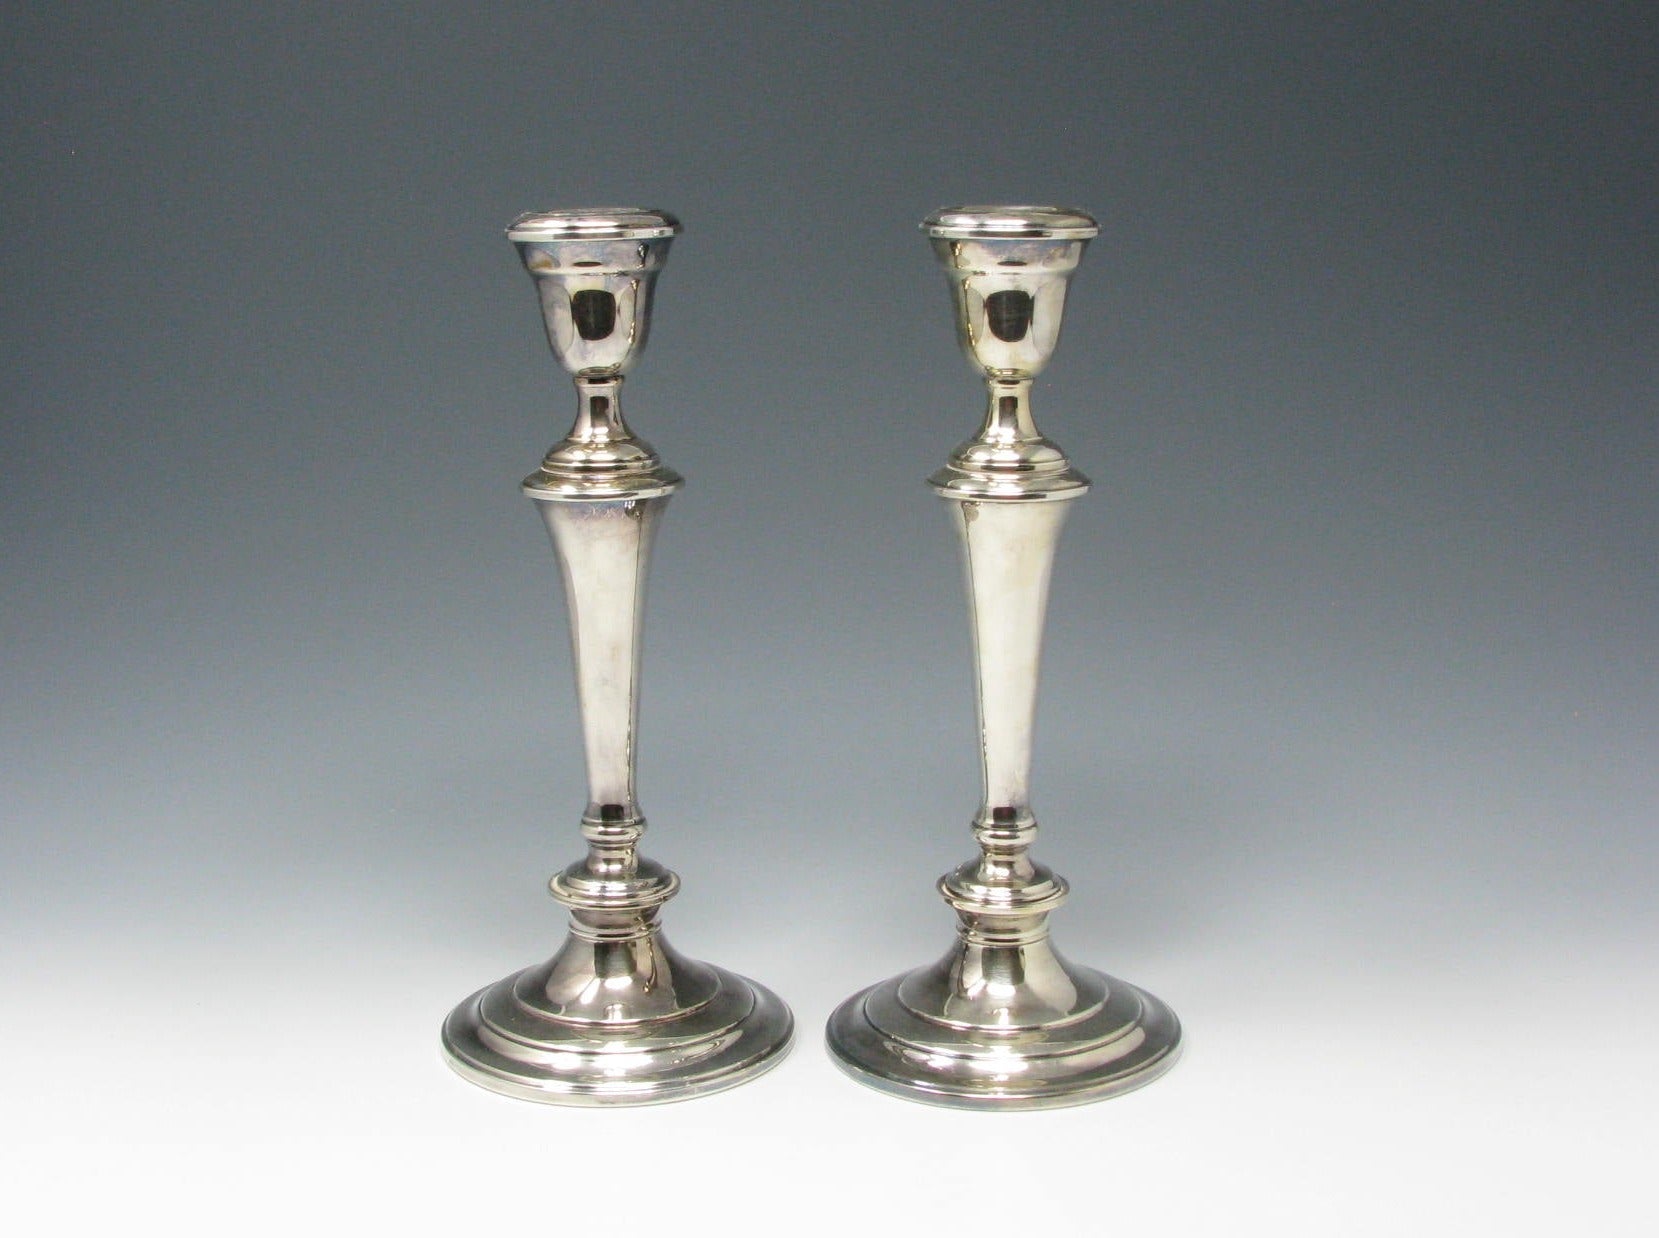 edgebrookhouse - Vintage Gorham Electroplated Silver Plate Candle Holders - a Pair